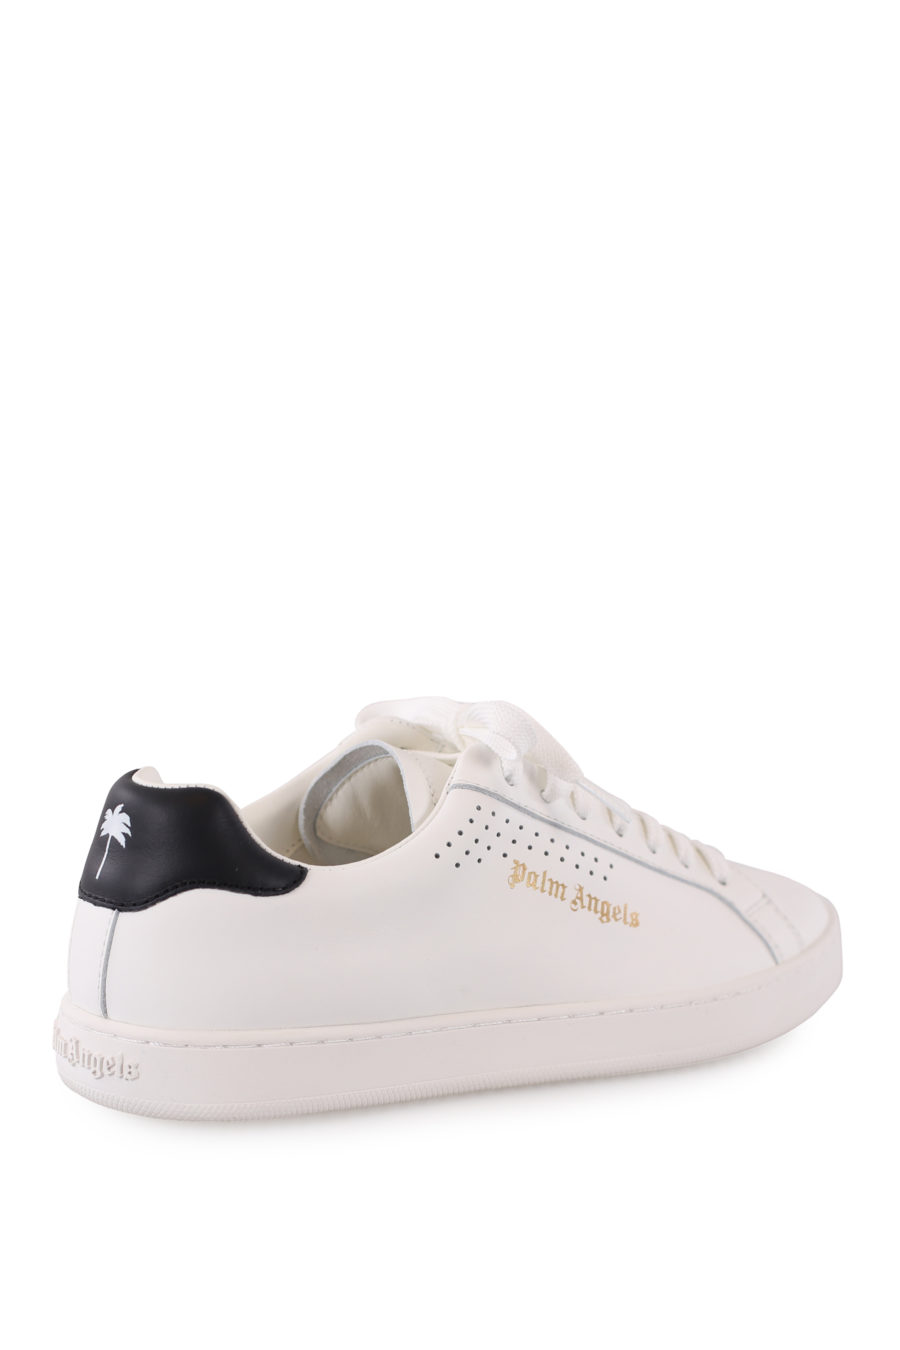 White trainers with gold logo - IMG 9050